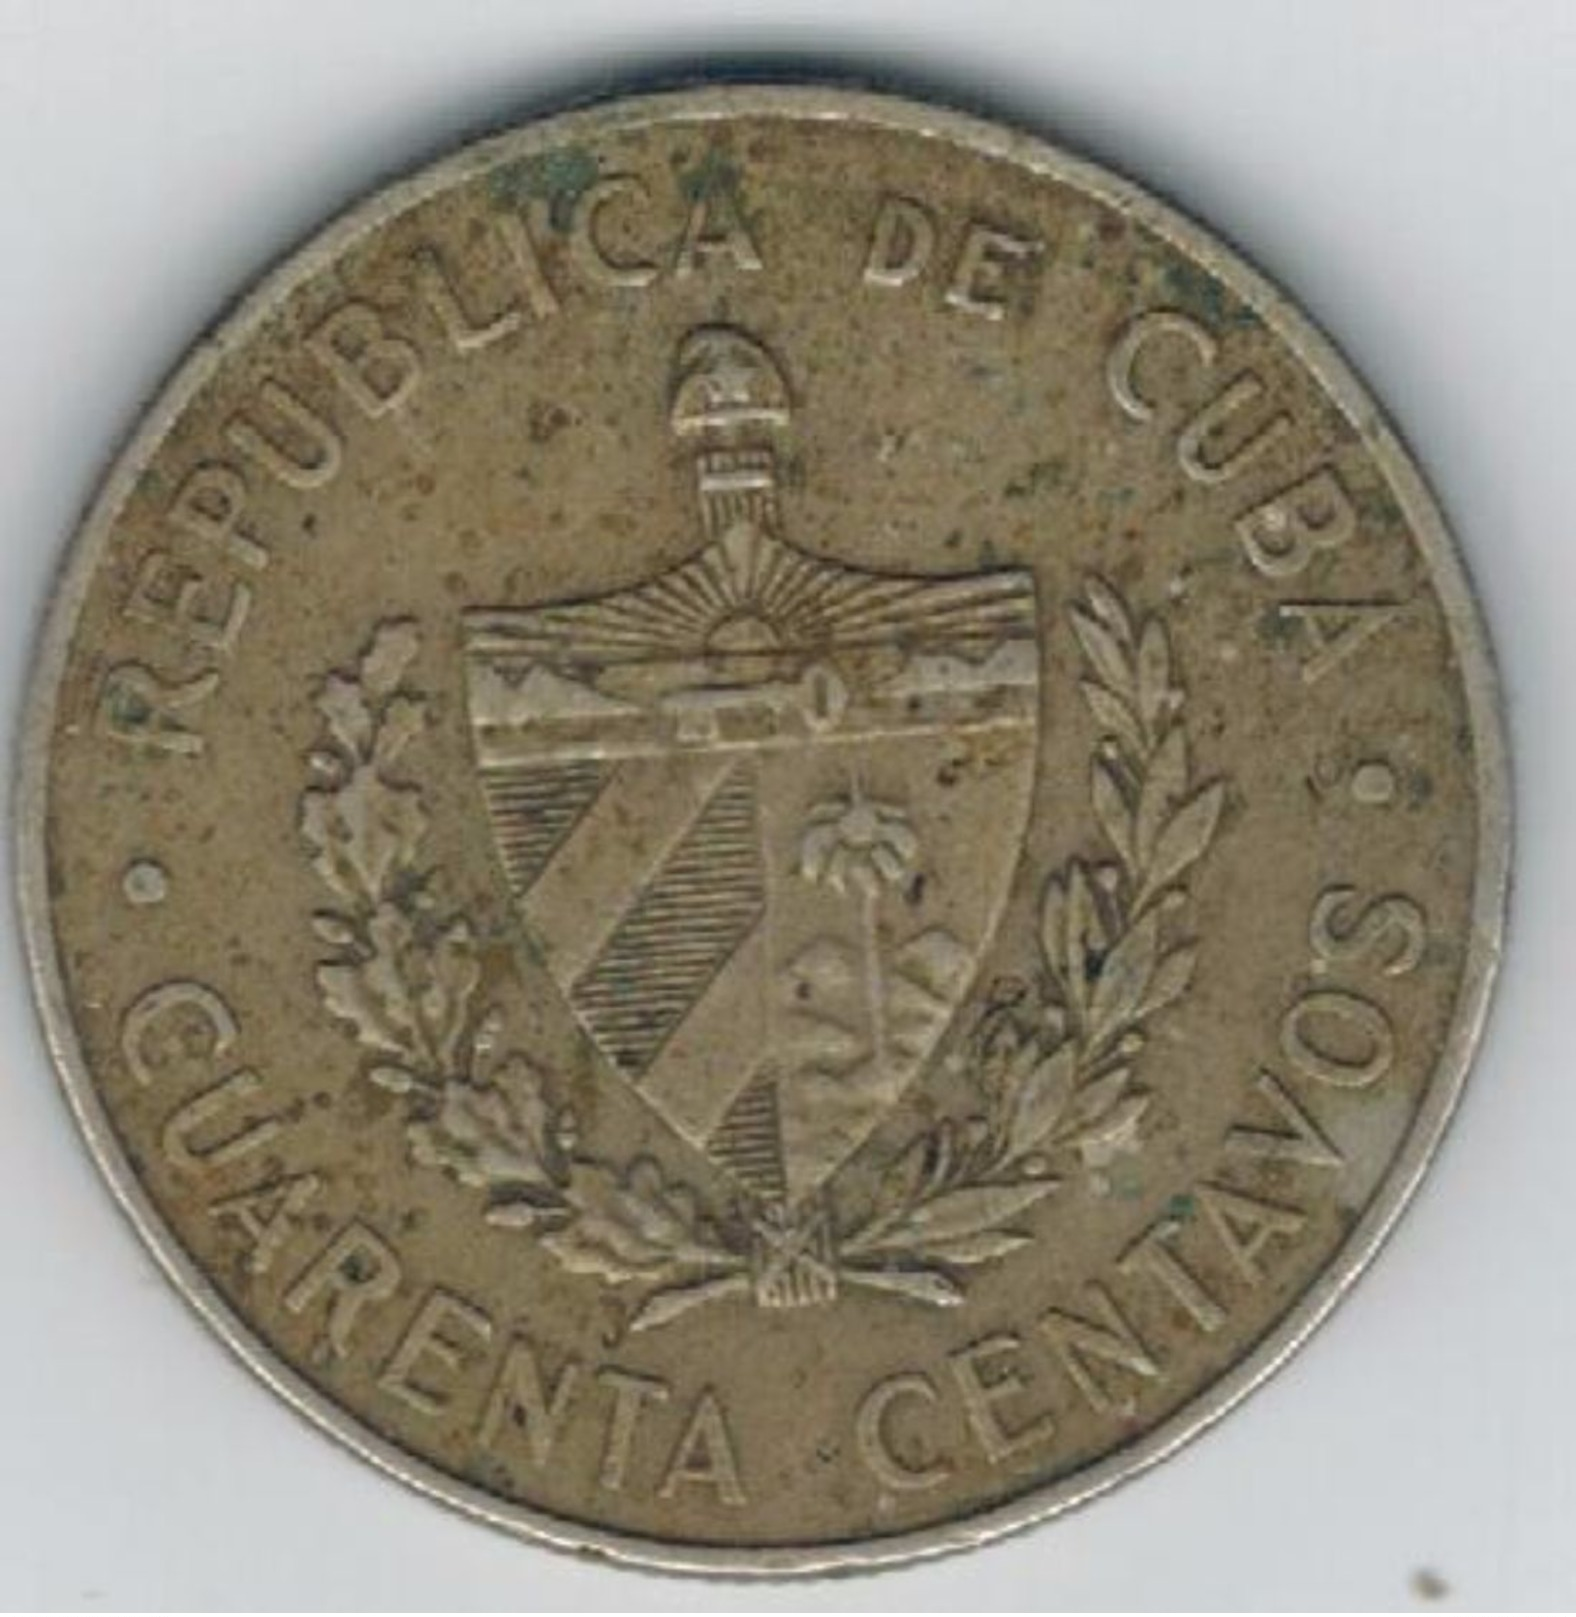 Cuba 40 Centavos 1962, Used, See Scans. Free Ship. To USA. NO PAYPAL. - Cuba